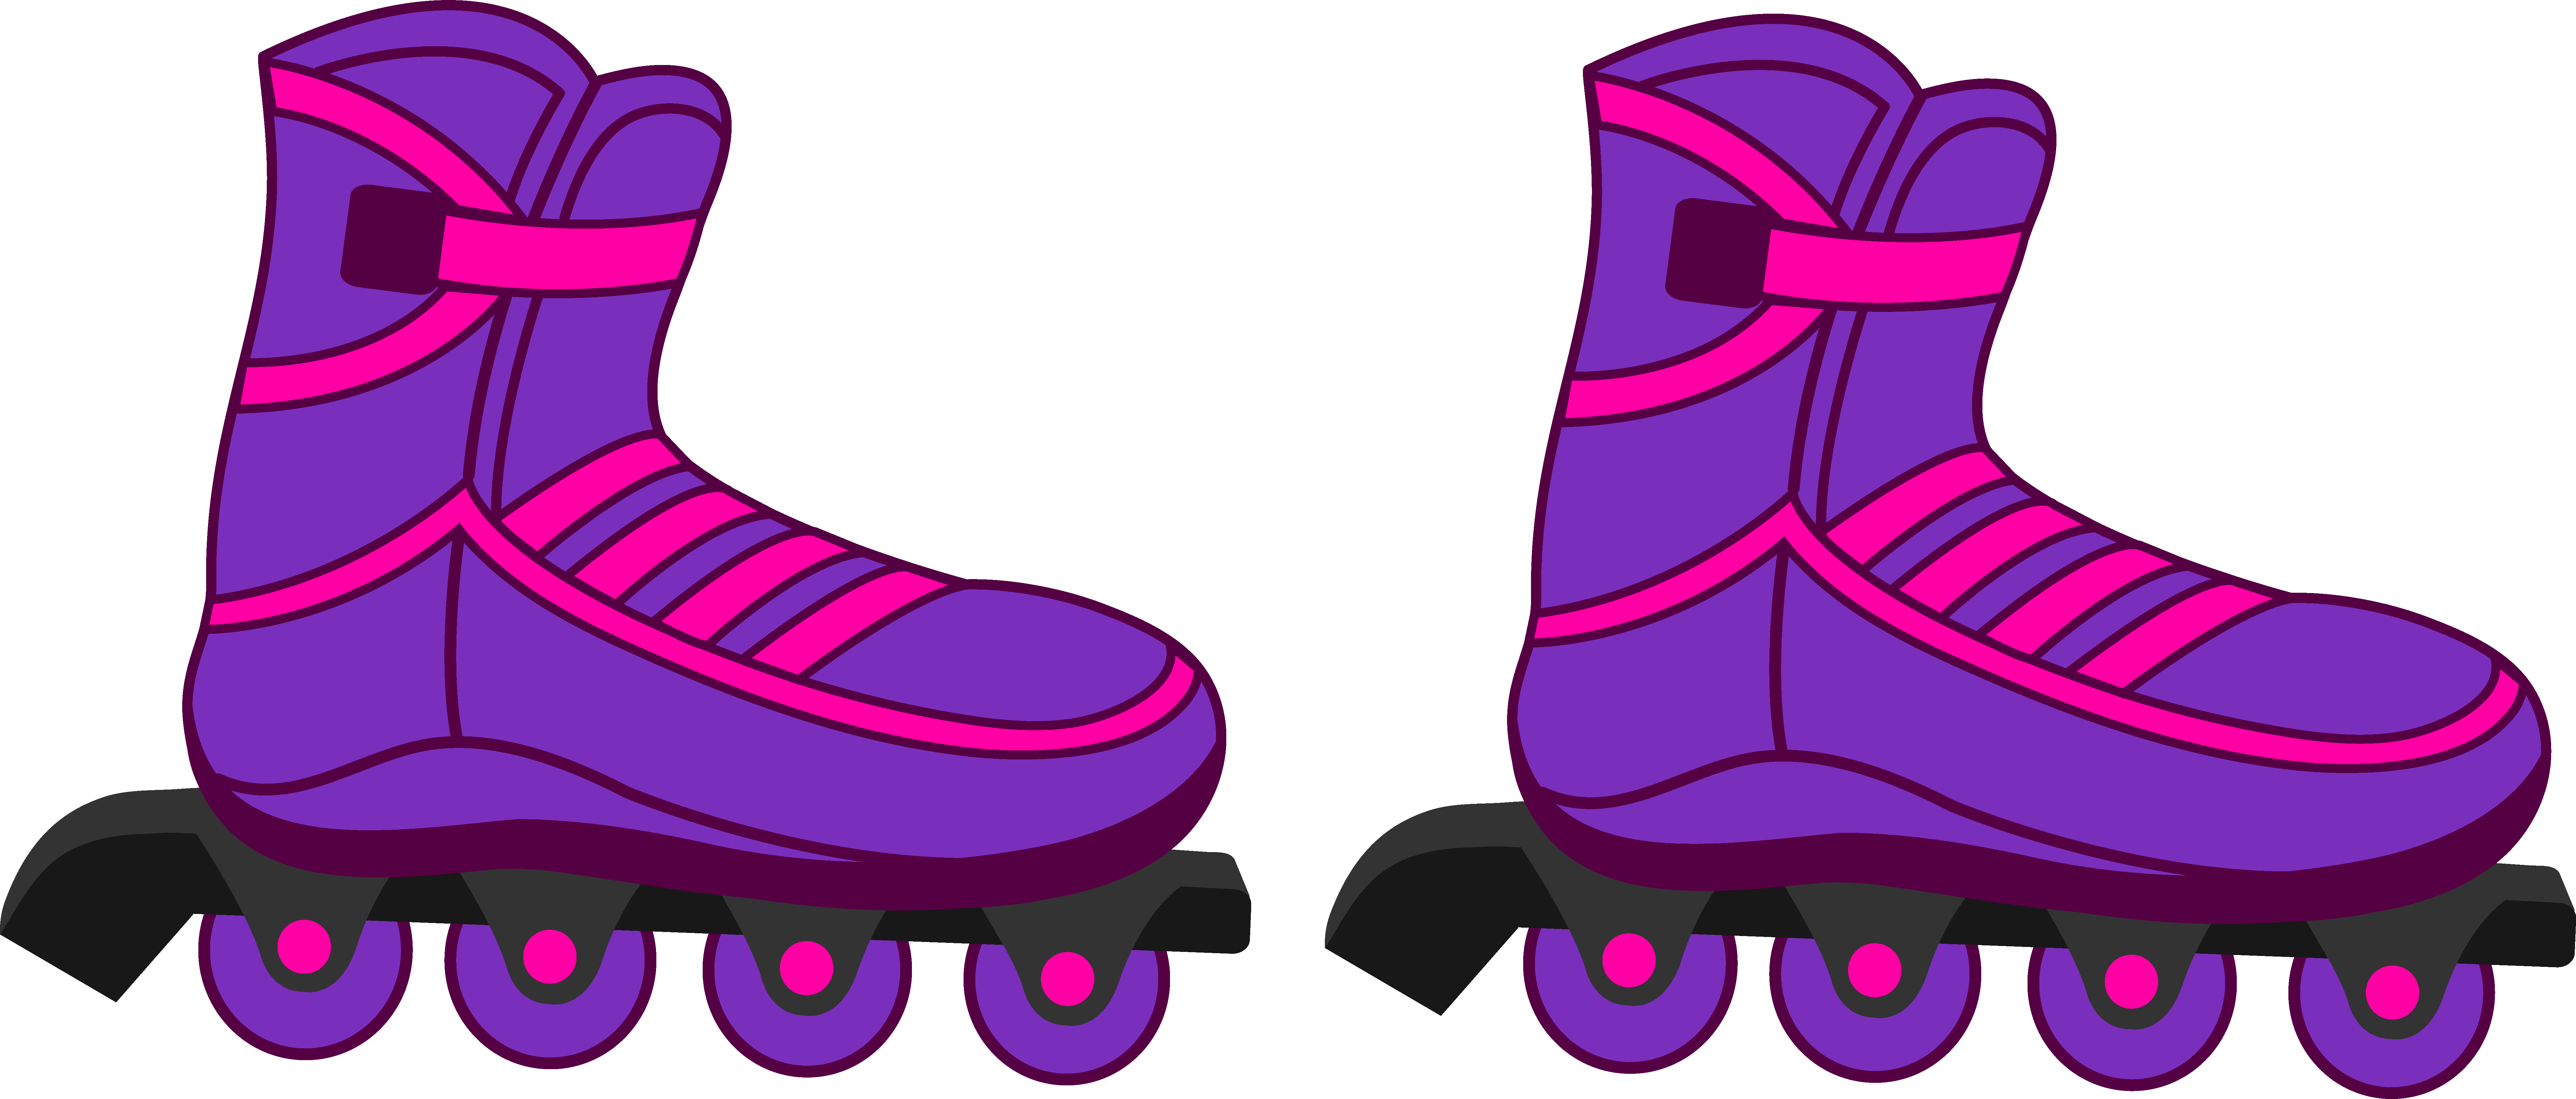 Clip Arts Related To : roller skates clipart. 